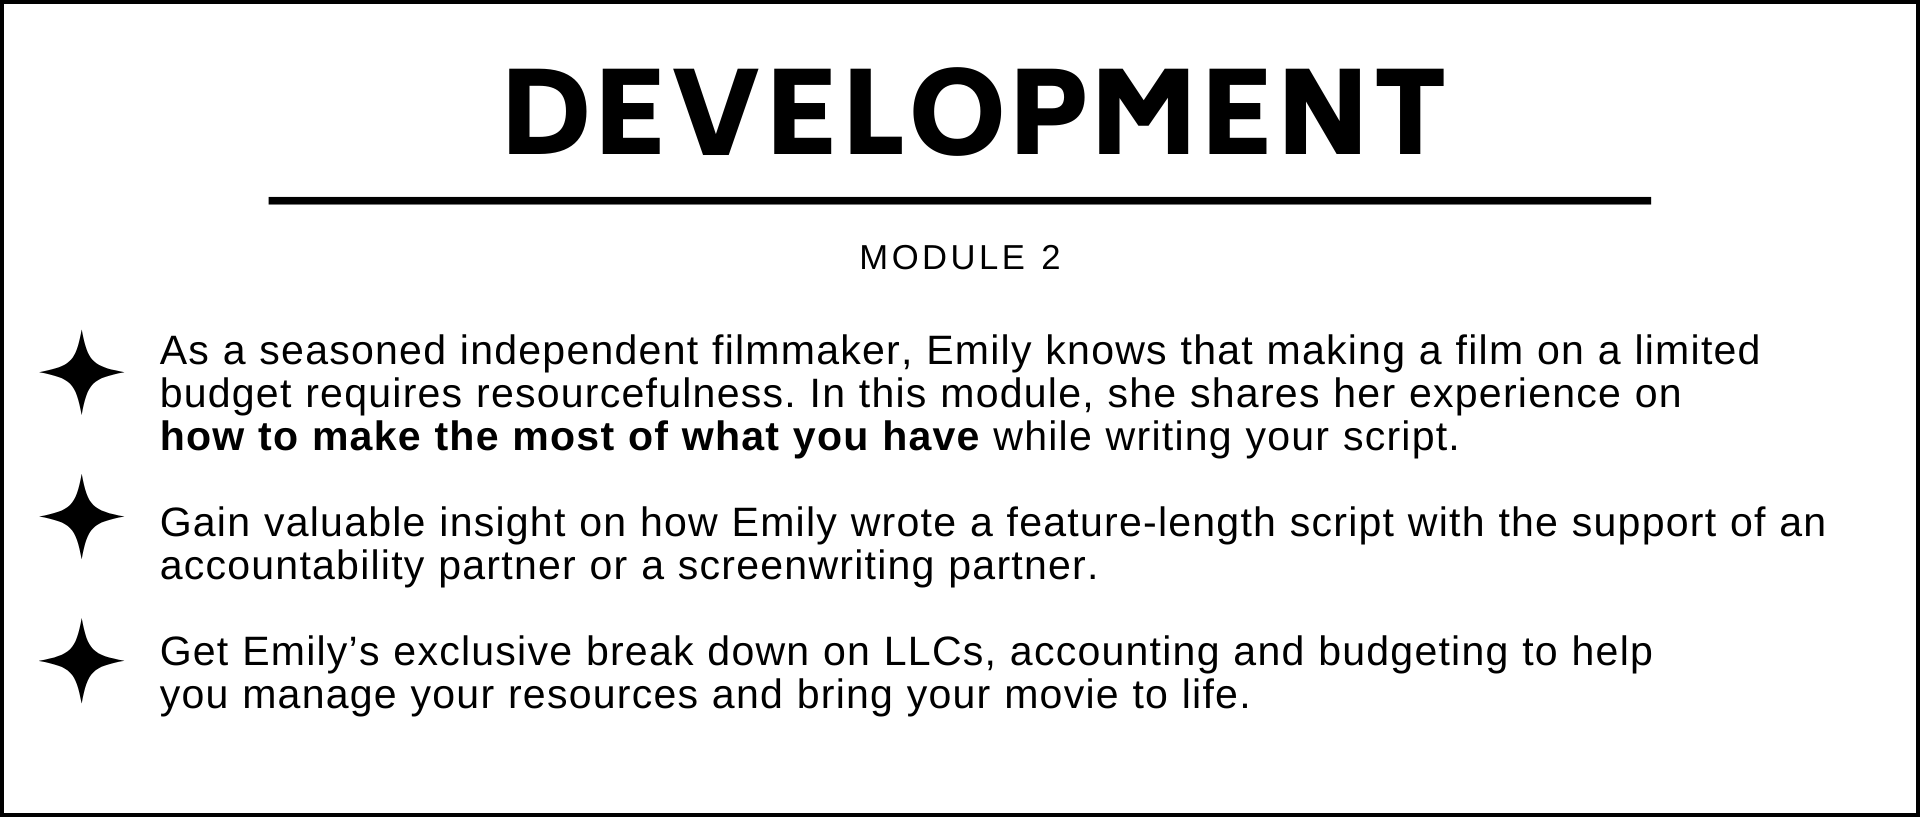 As a seasoned filmmaker, Emily knows that making a film on a limited budget requires resourcefulness. In this module, she shares her experience on how to make the most of what you have while writing your script.   Gain valuable insight on how Emily wrote a feature-length script with the support of an accountability partner or a screenwriting partner.  Get Emily’s exclusive inside look on LLCs, accounting and budgeting to help  you manage your resources and bring your movie to life.